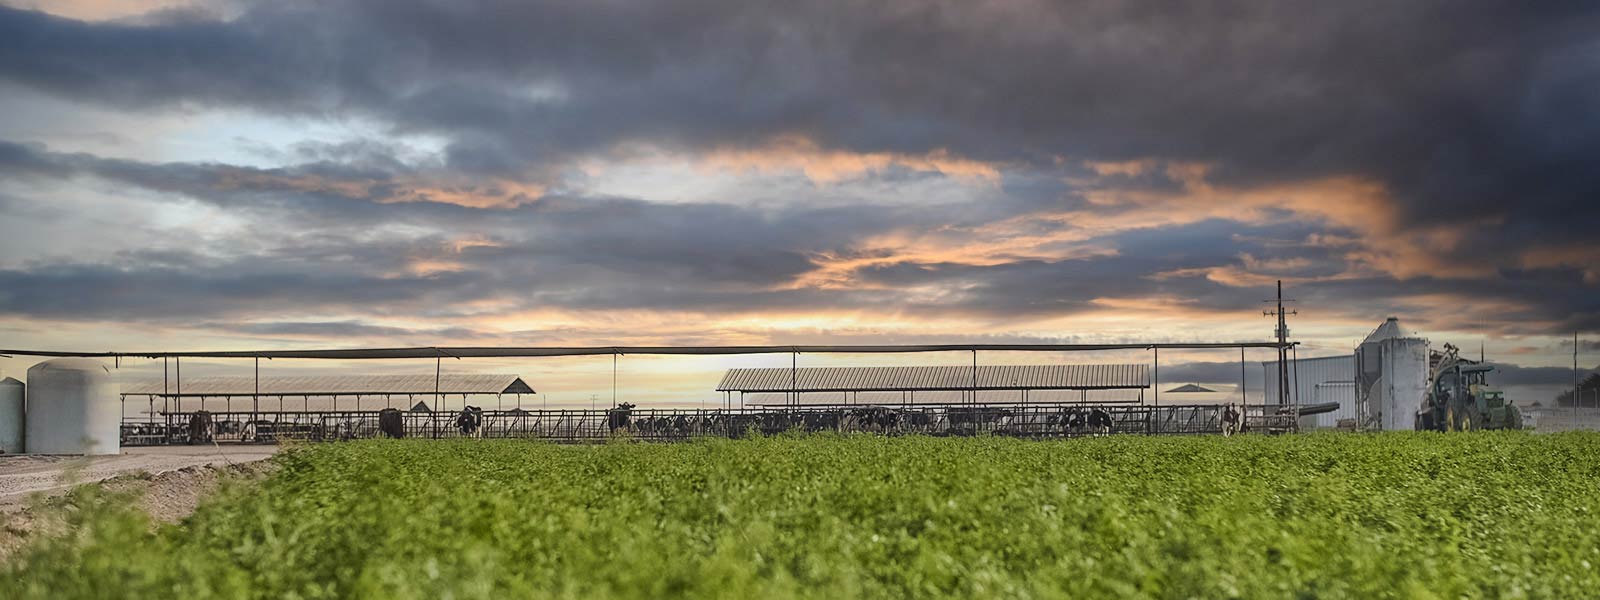 Sunrise behind a dairy farm with green field in foreground